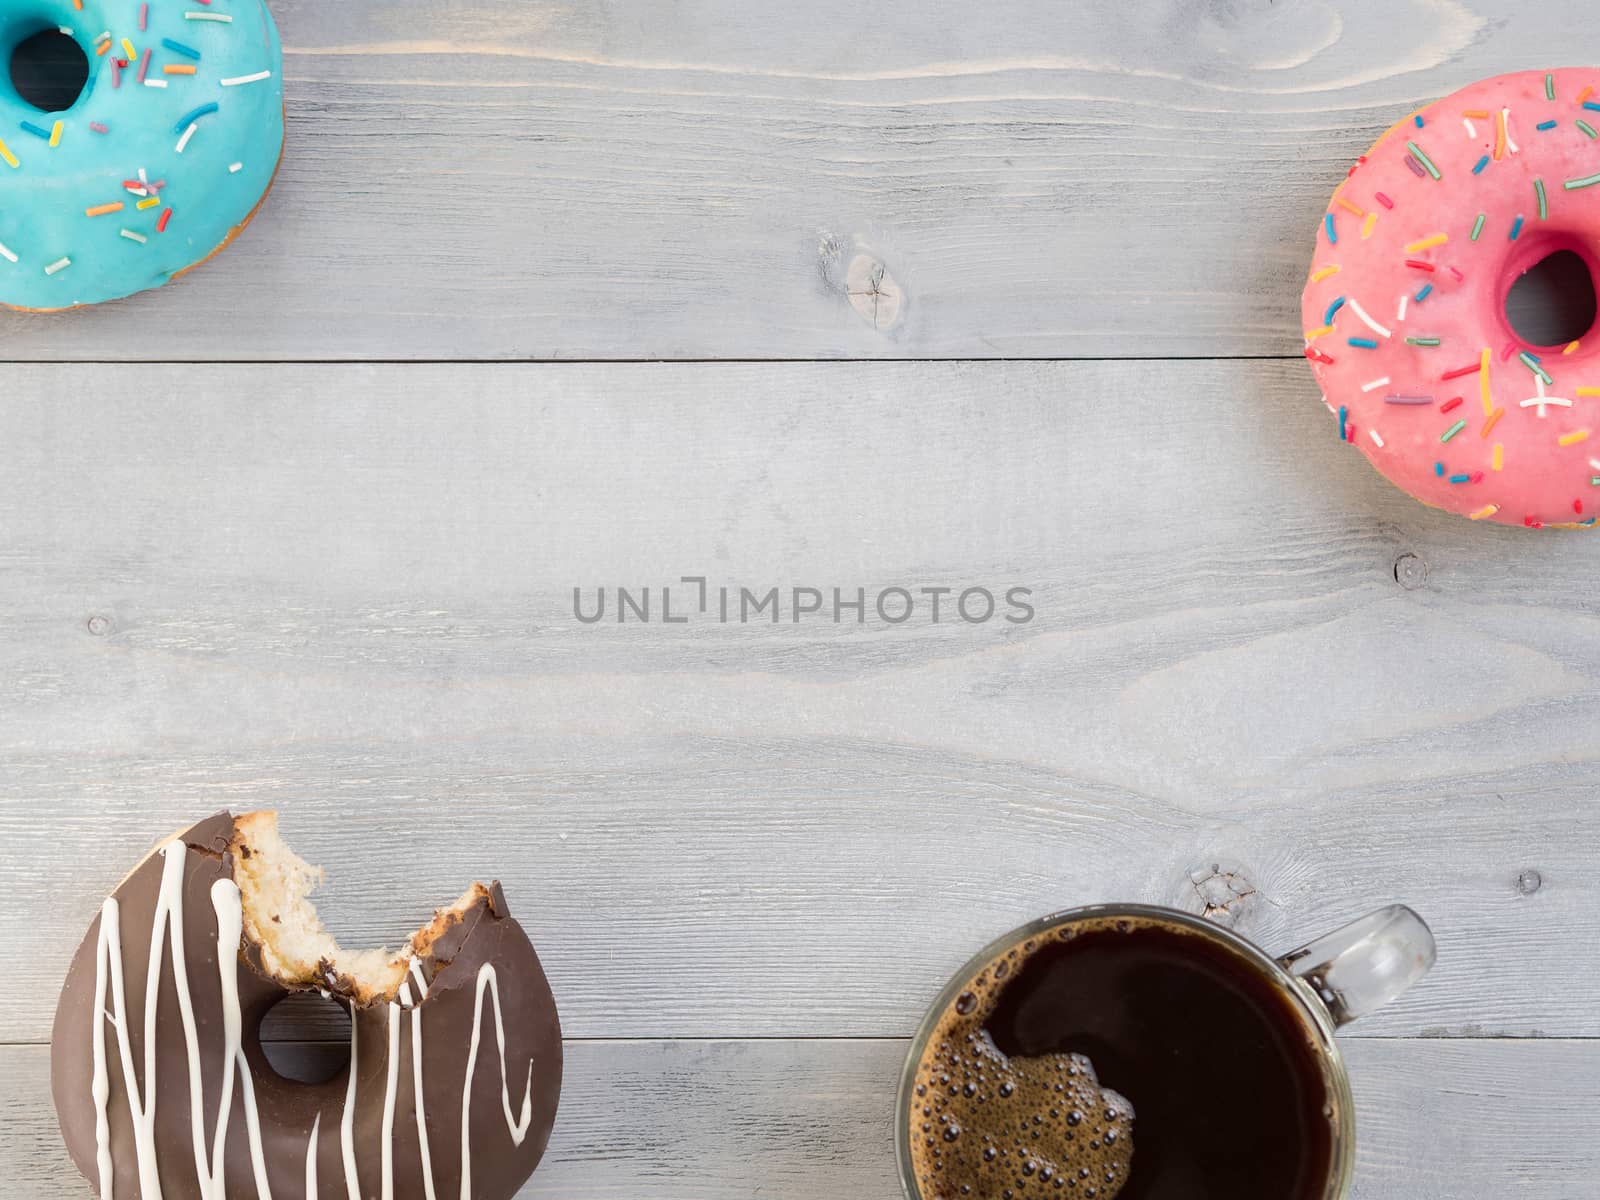 Top view of assorted donuts and coffee on gray wooden background with copy space. Colorful donuts and coffee background with copyspace. Various glazed doughnuts with sprinkles on grey wooden table.